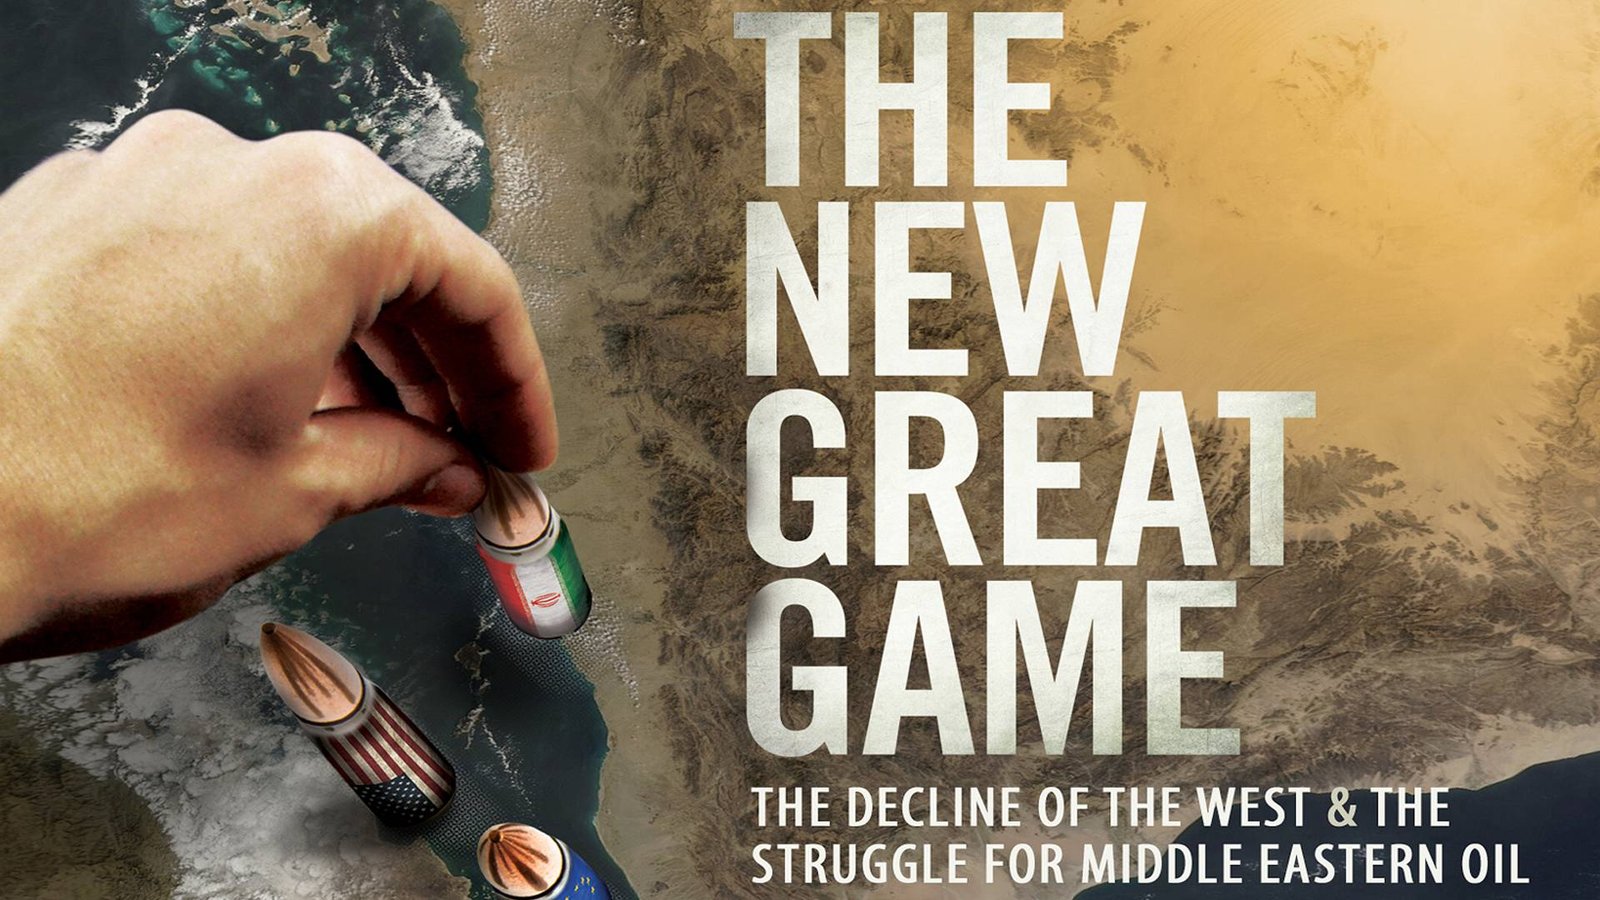 The New Great Game - The Decline of the West & the Struggle for Middle Eastern Oil